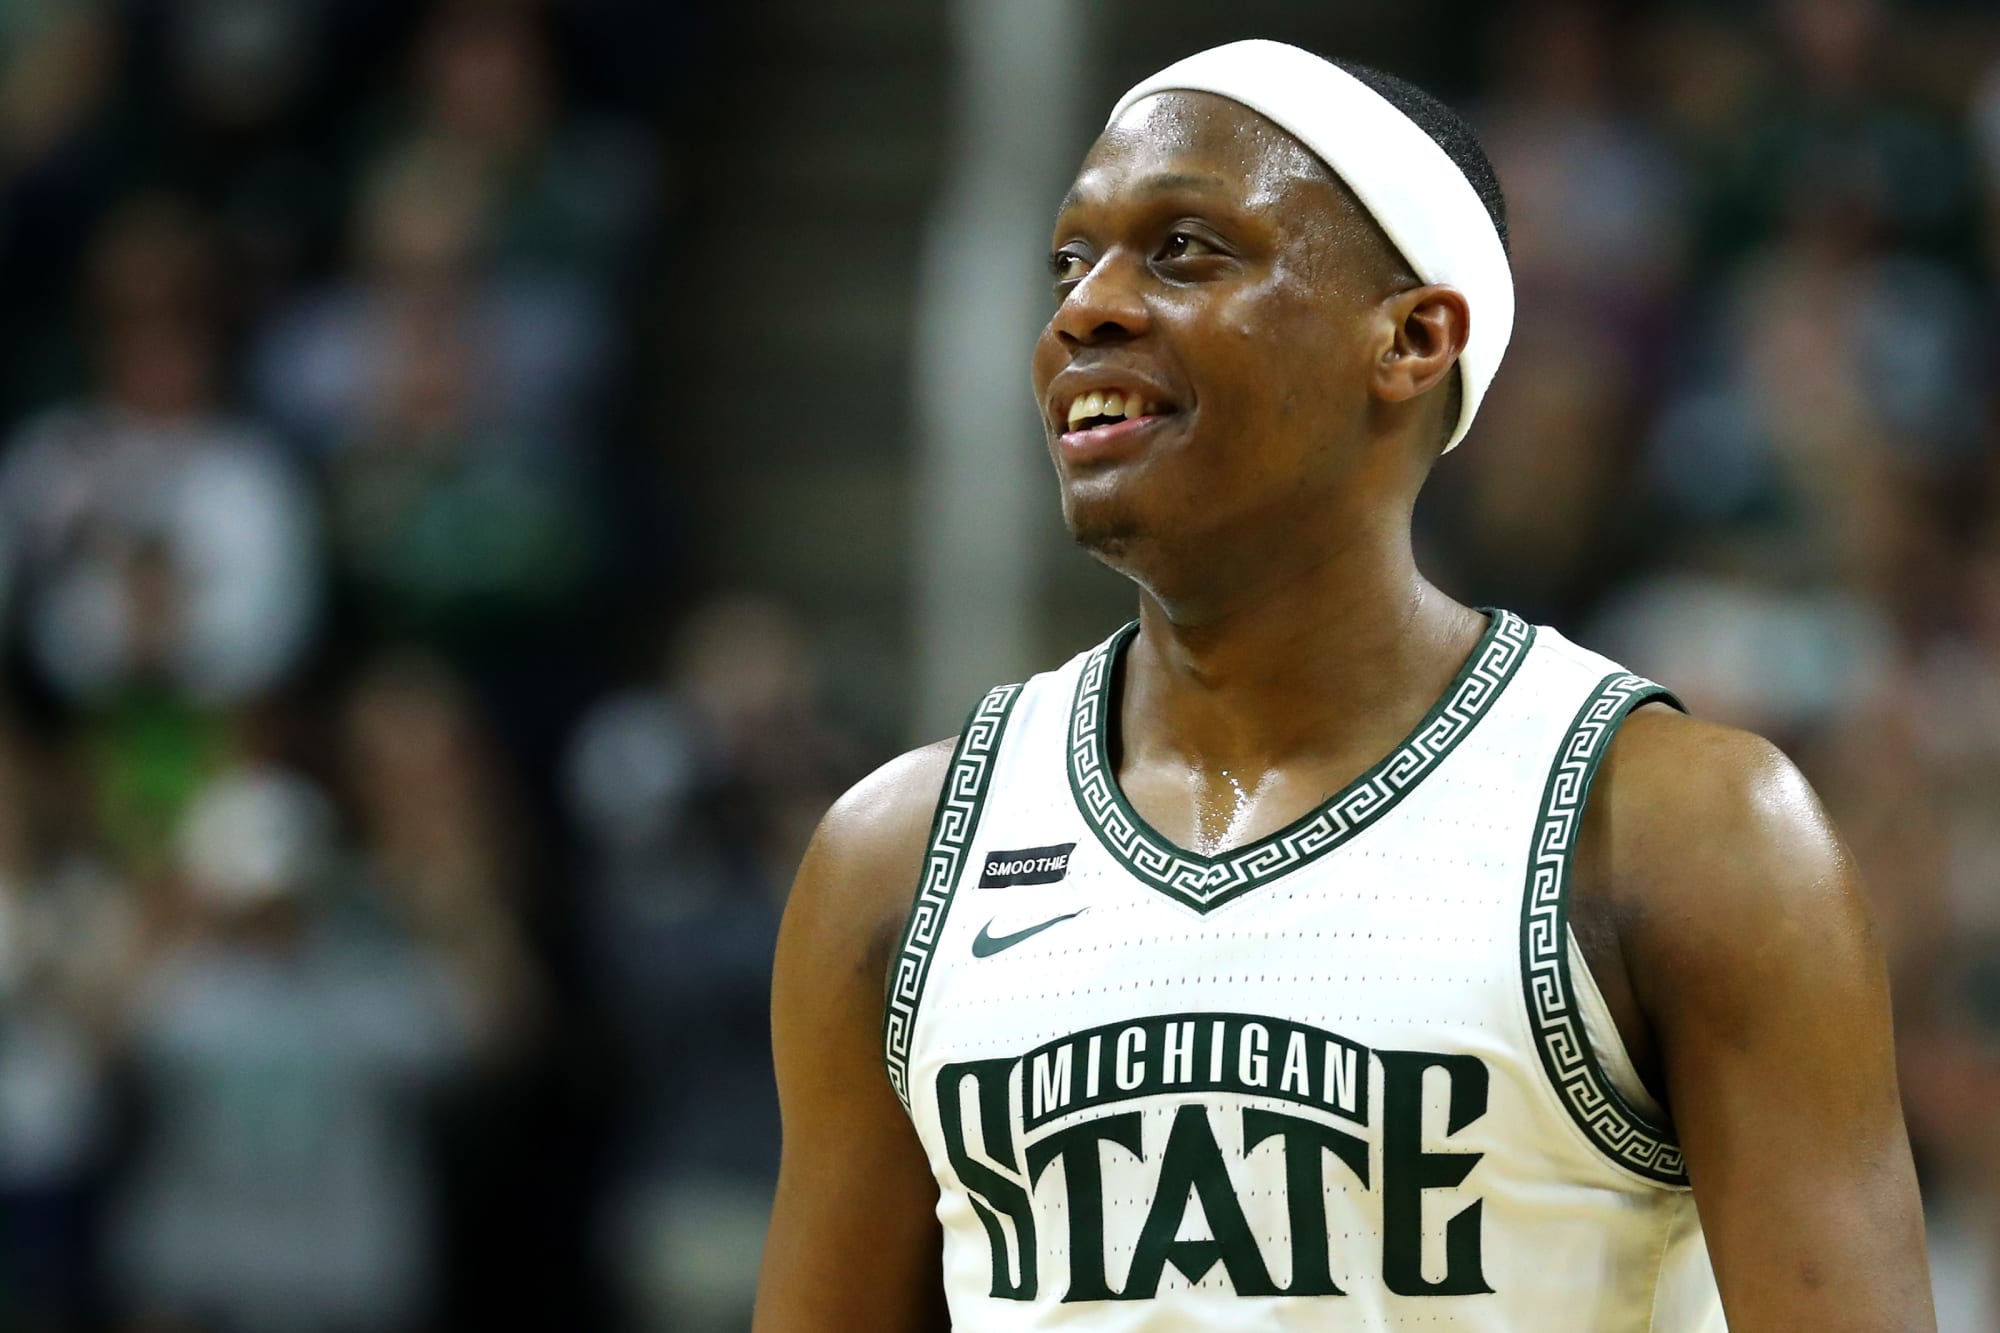 Cassius Winston fights for NBA dream, with MSU basketball still on the mind